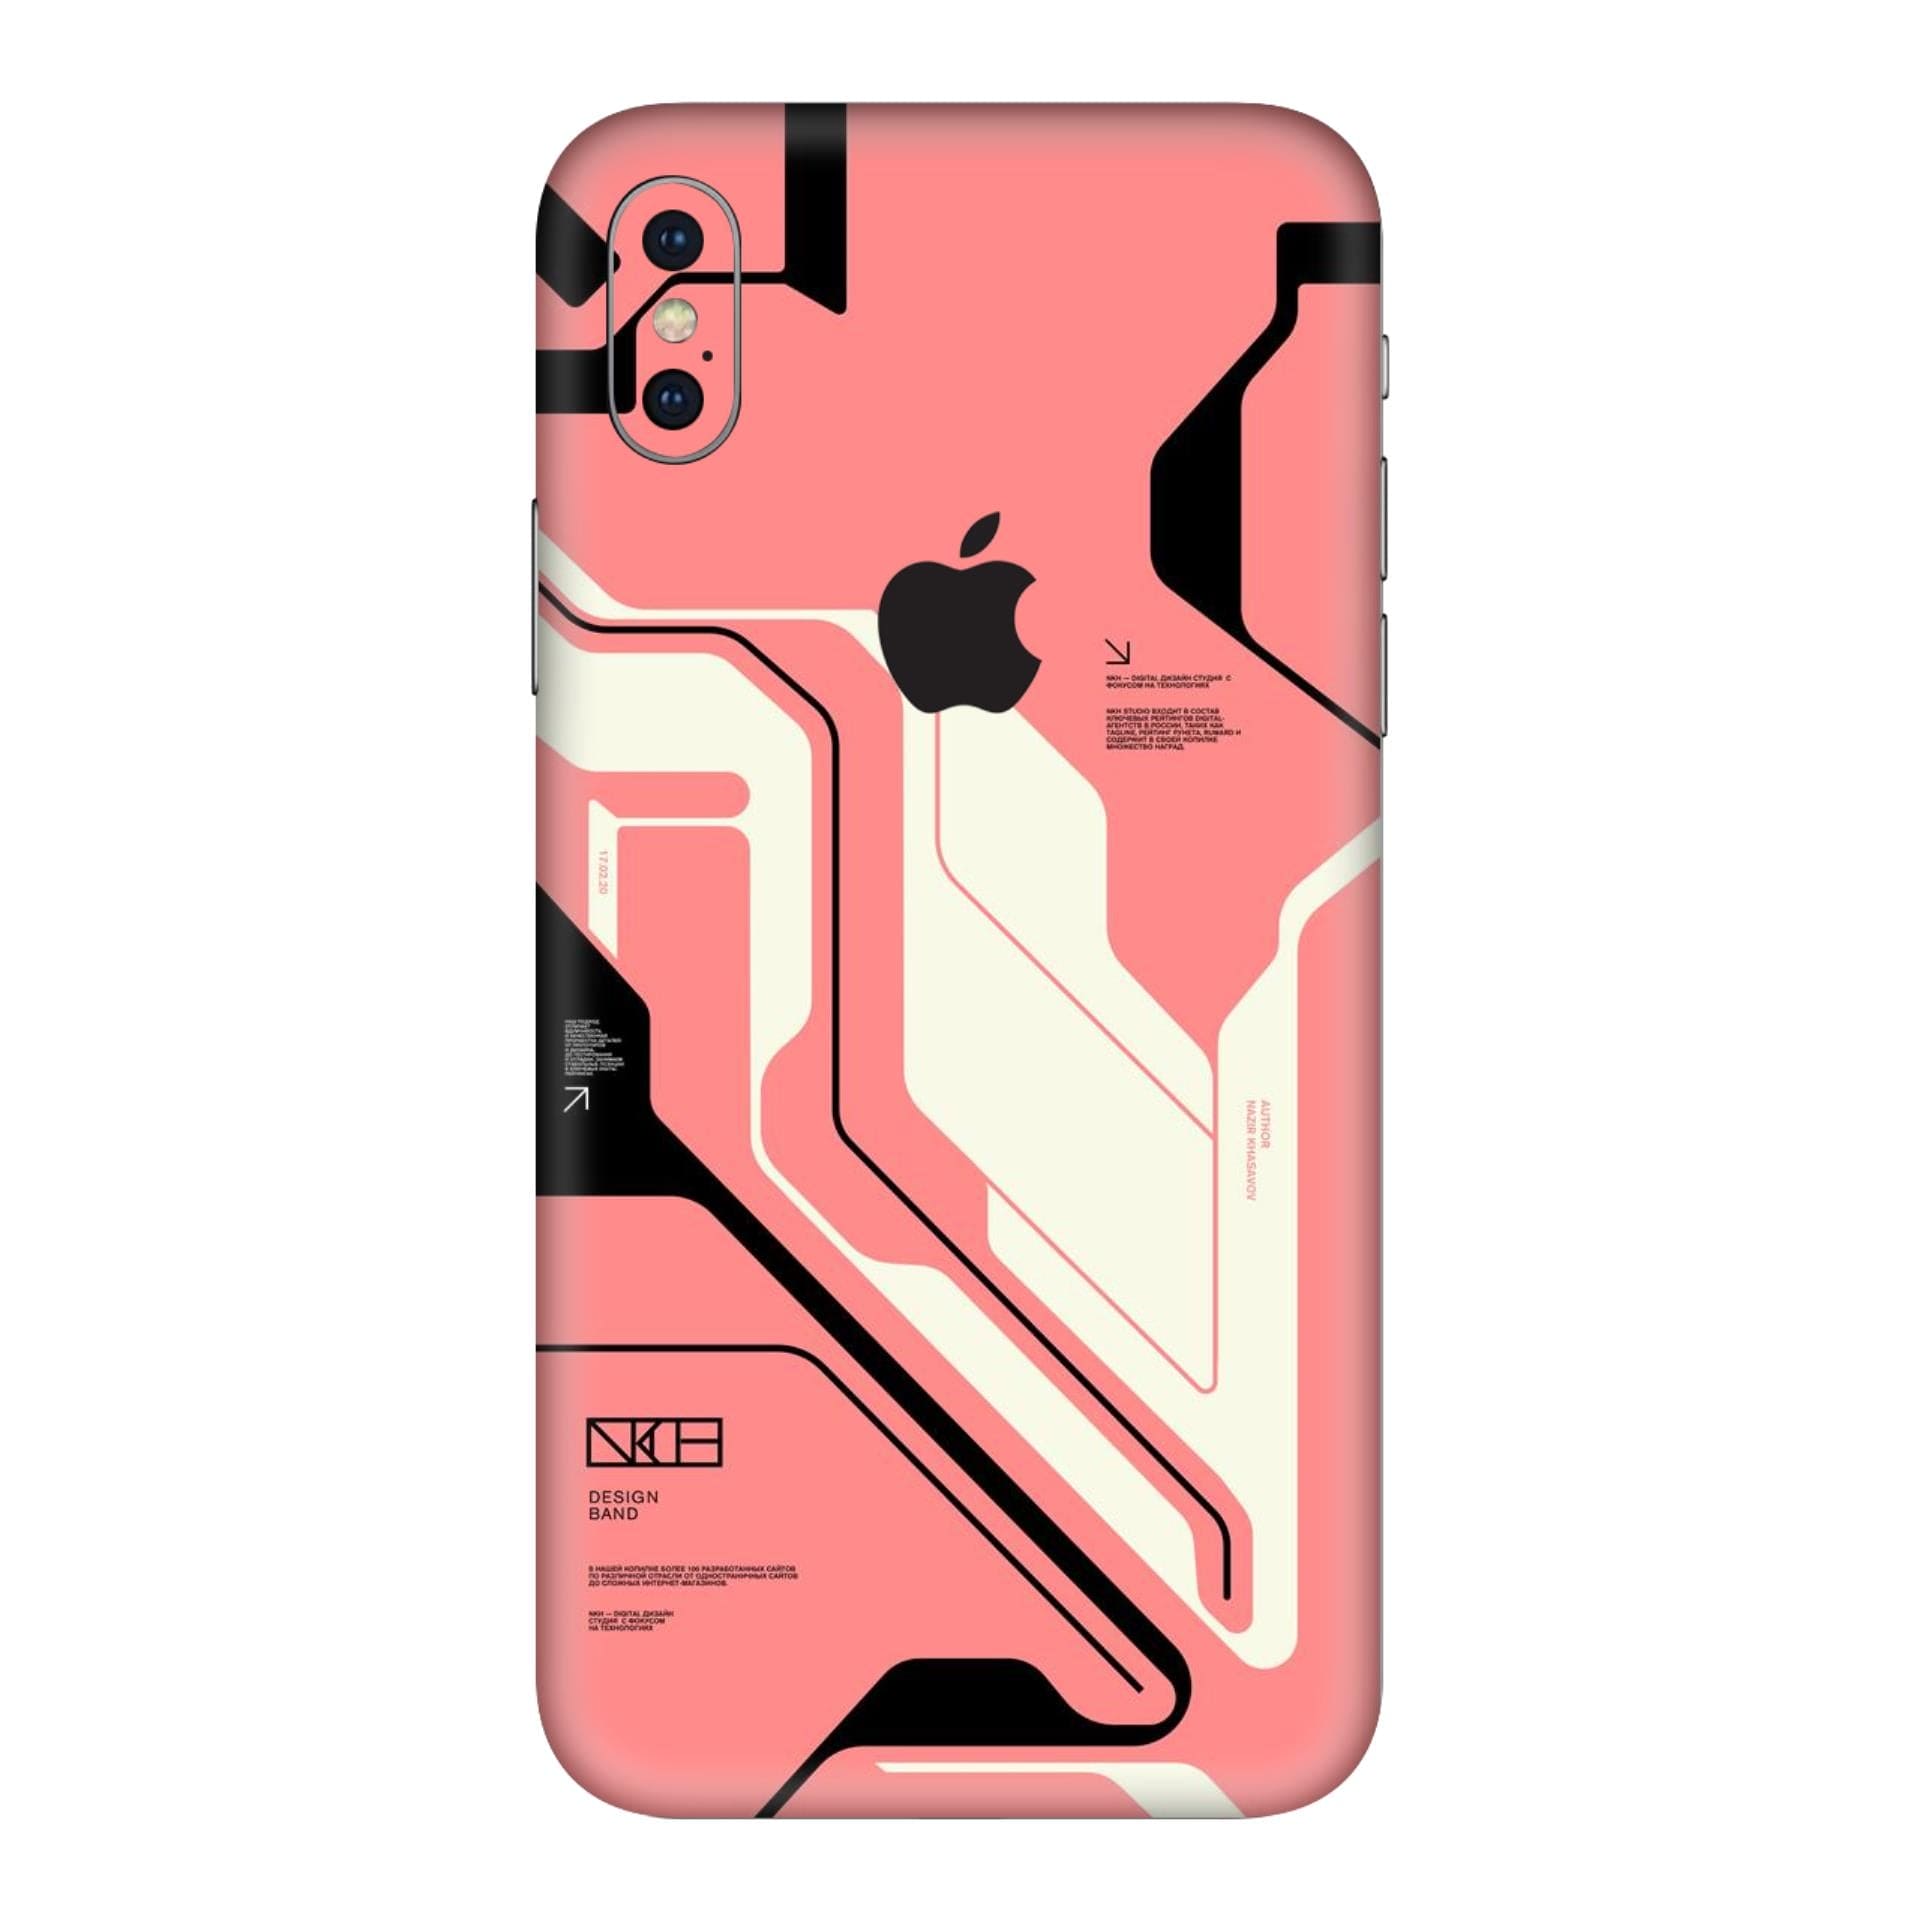 iphone XS Cyber pink skins